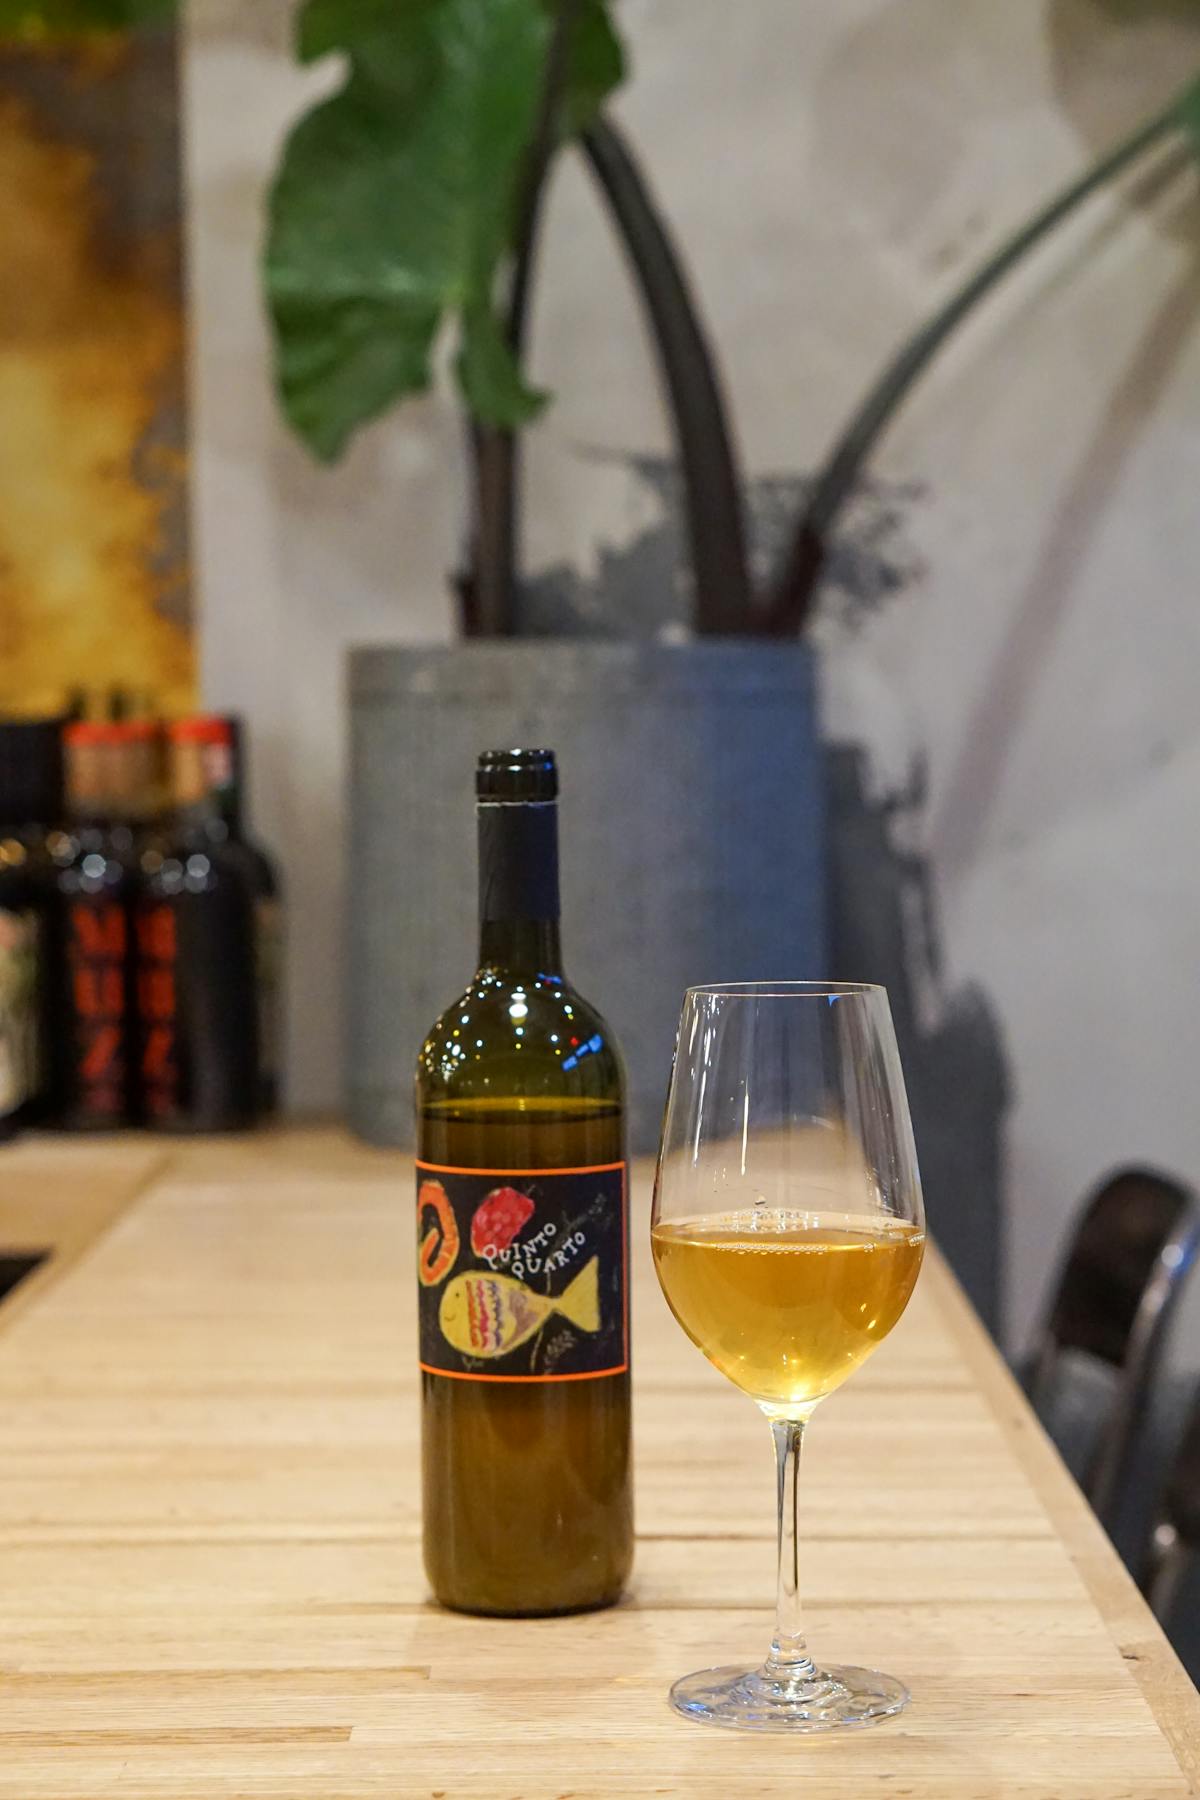 a bottle of natural orangewine from Italy, and a glass on a table